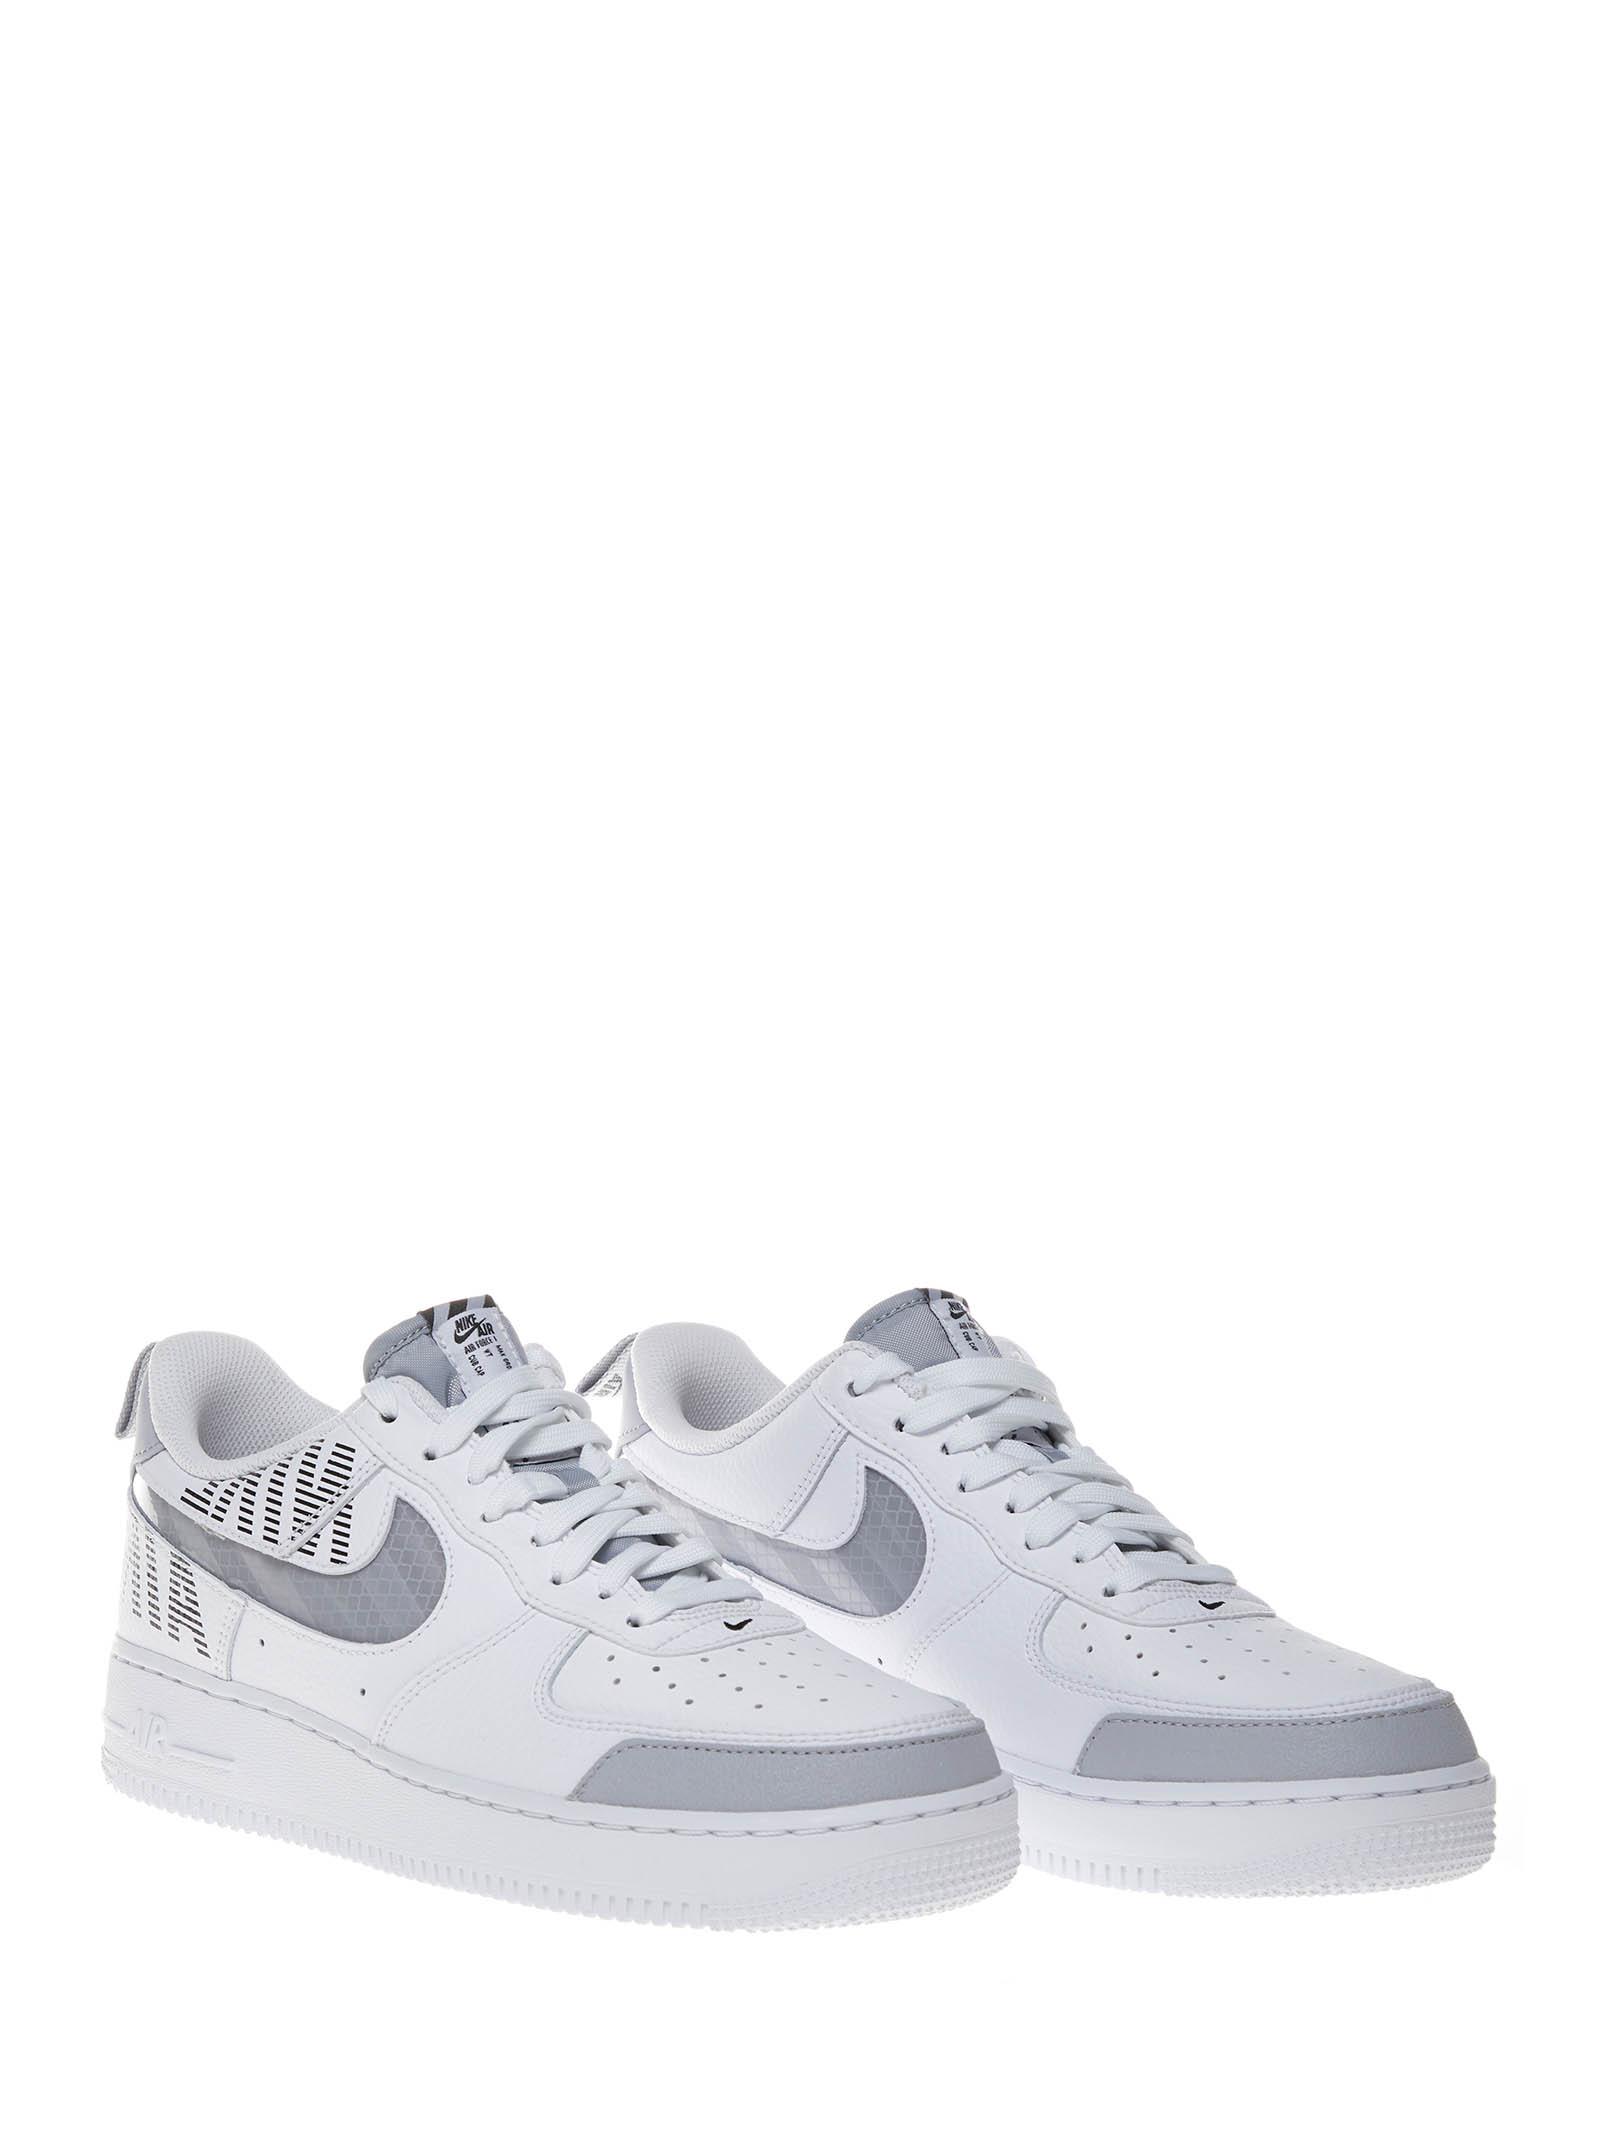 nike air force 1 '07 lv8 reflective